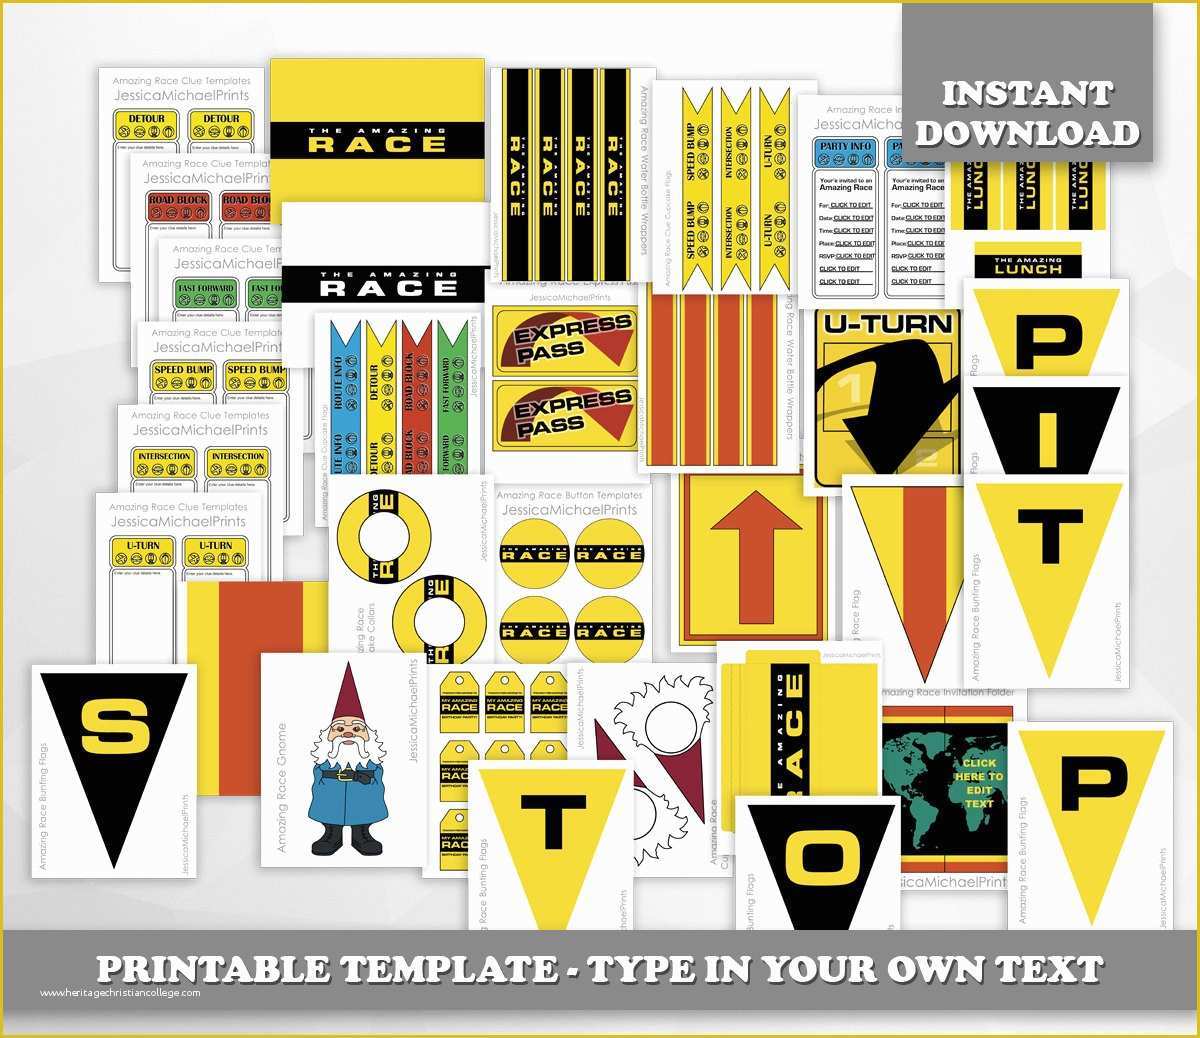 Amazing Race Editable Templates Free Of Limited Time the Amazing Race